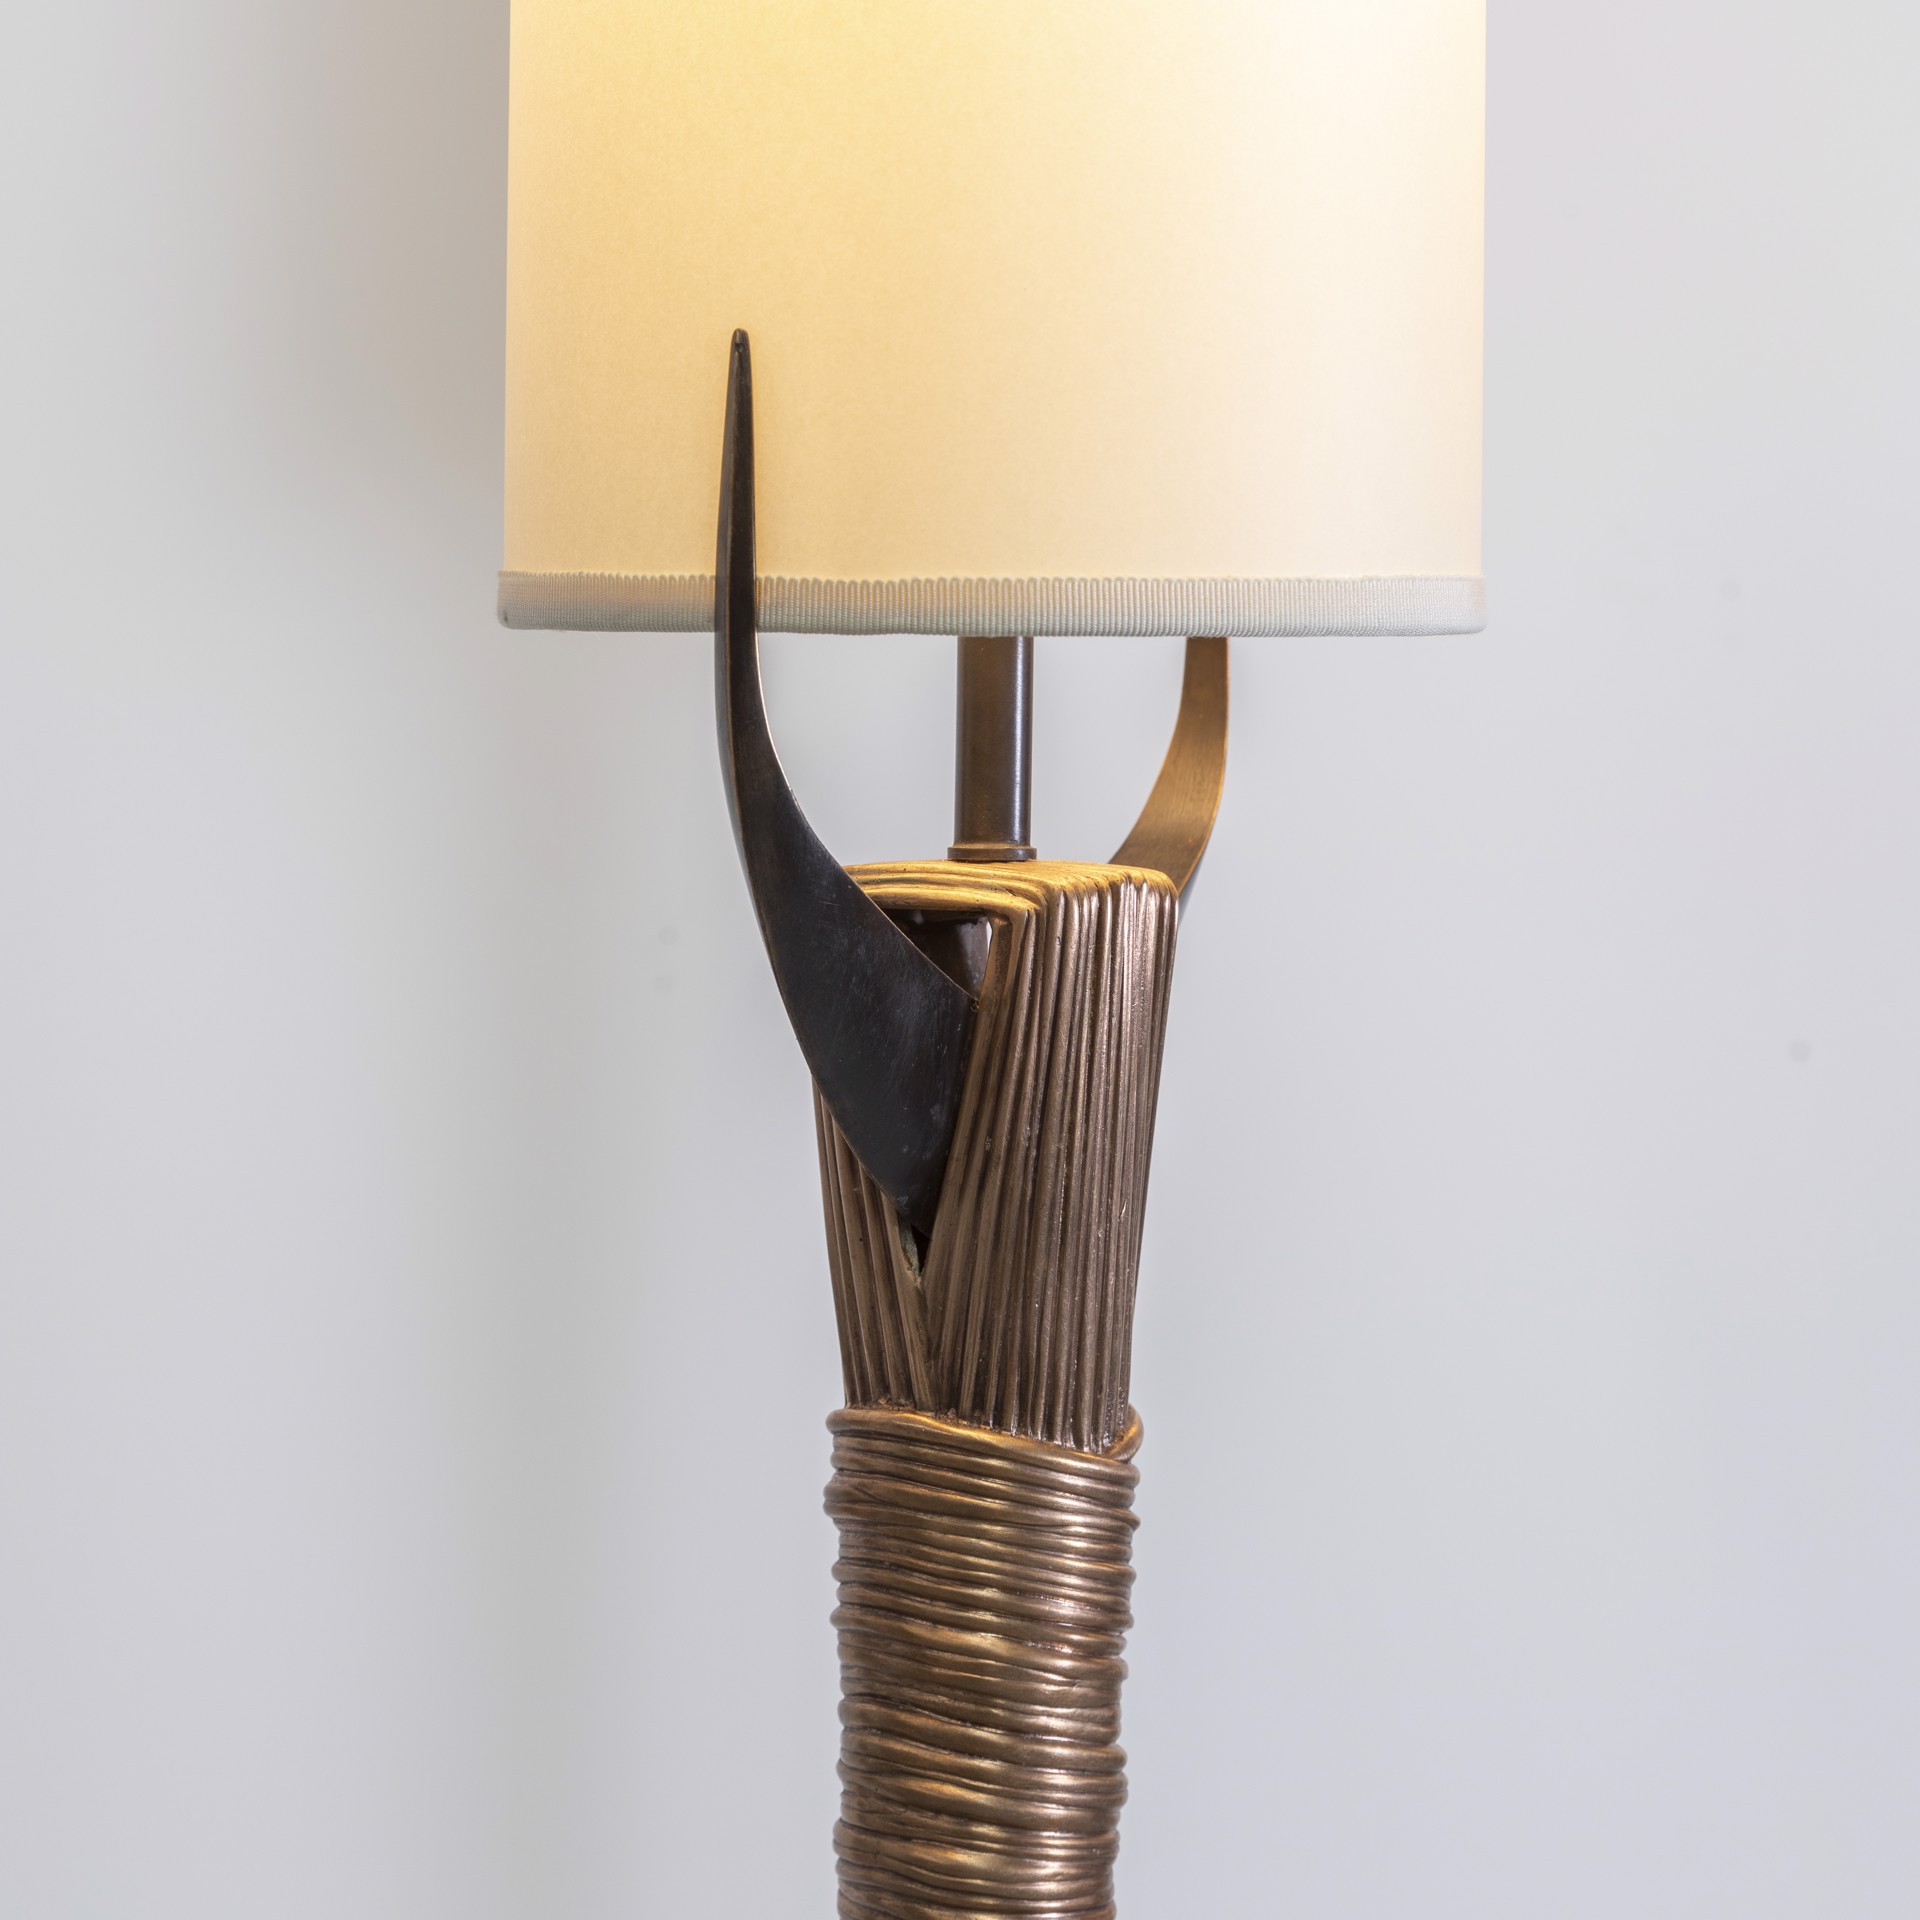 Floor lamp with textured bronze by Anasthasia Millot